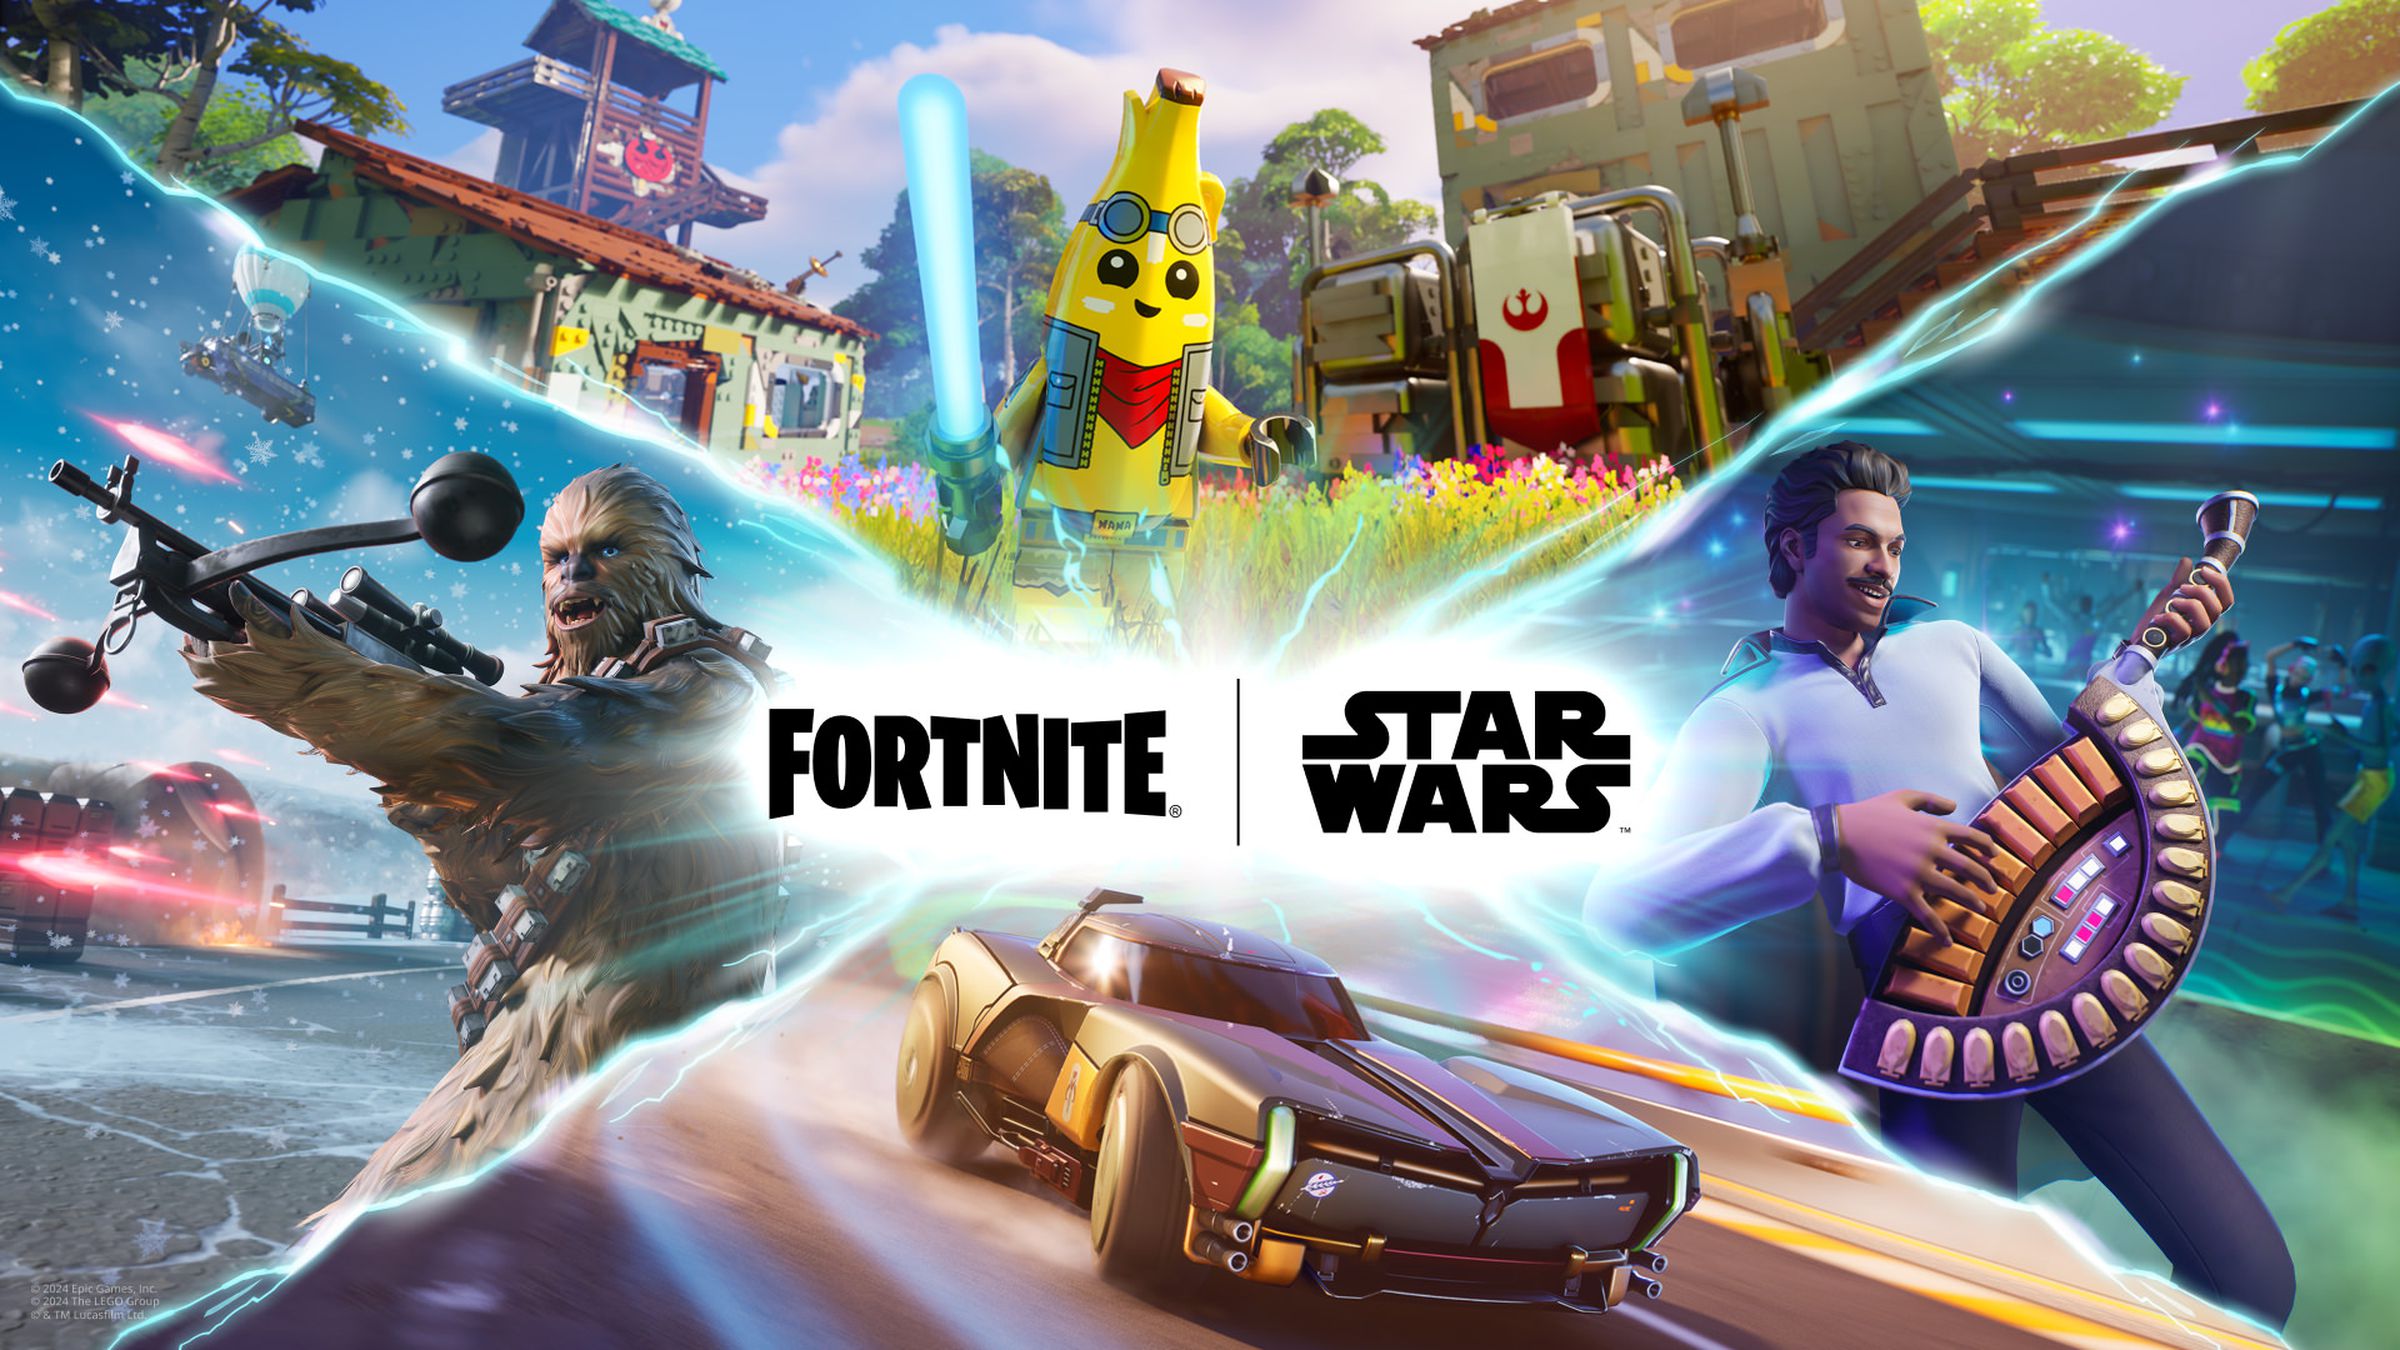 Promotional art for a crossover between Fortnite and Star Wars.